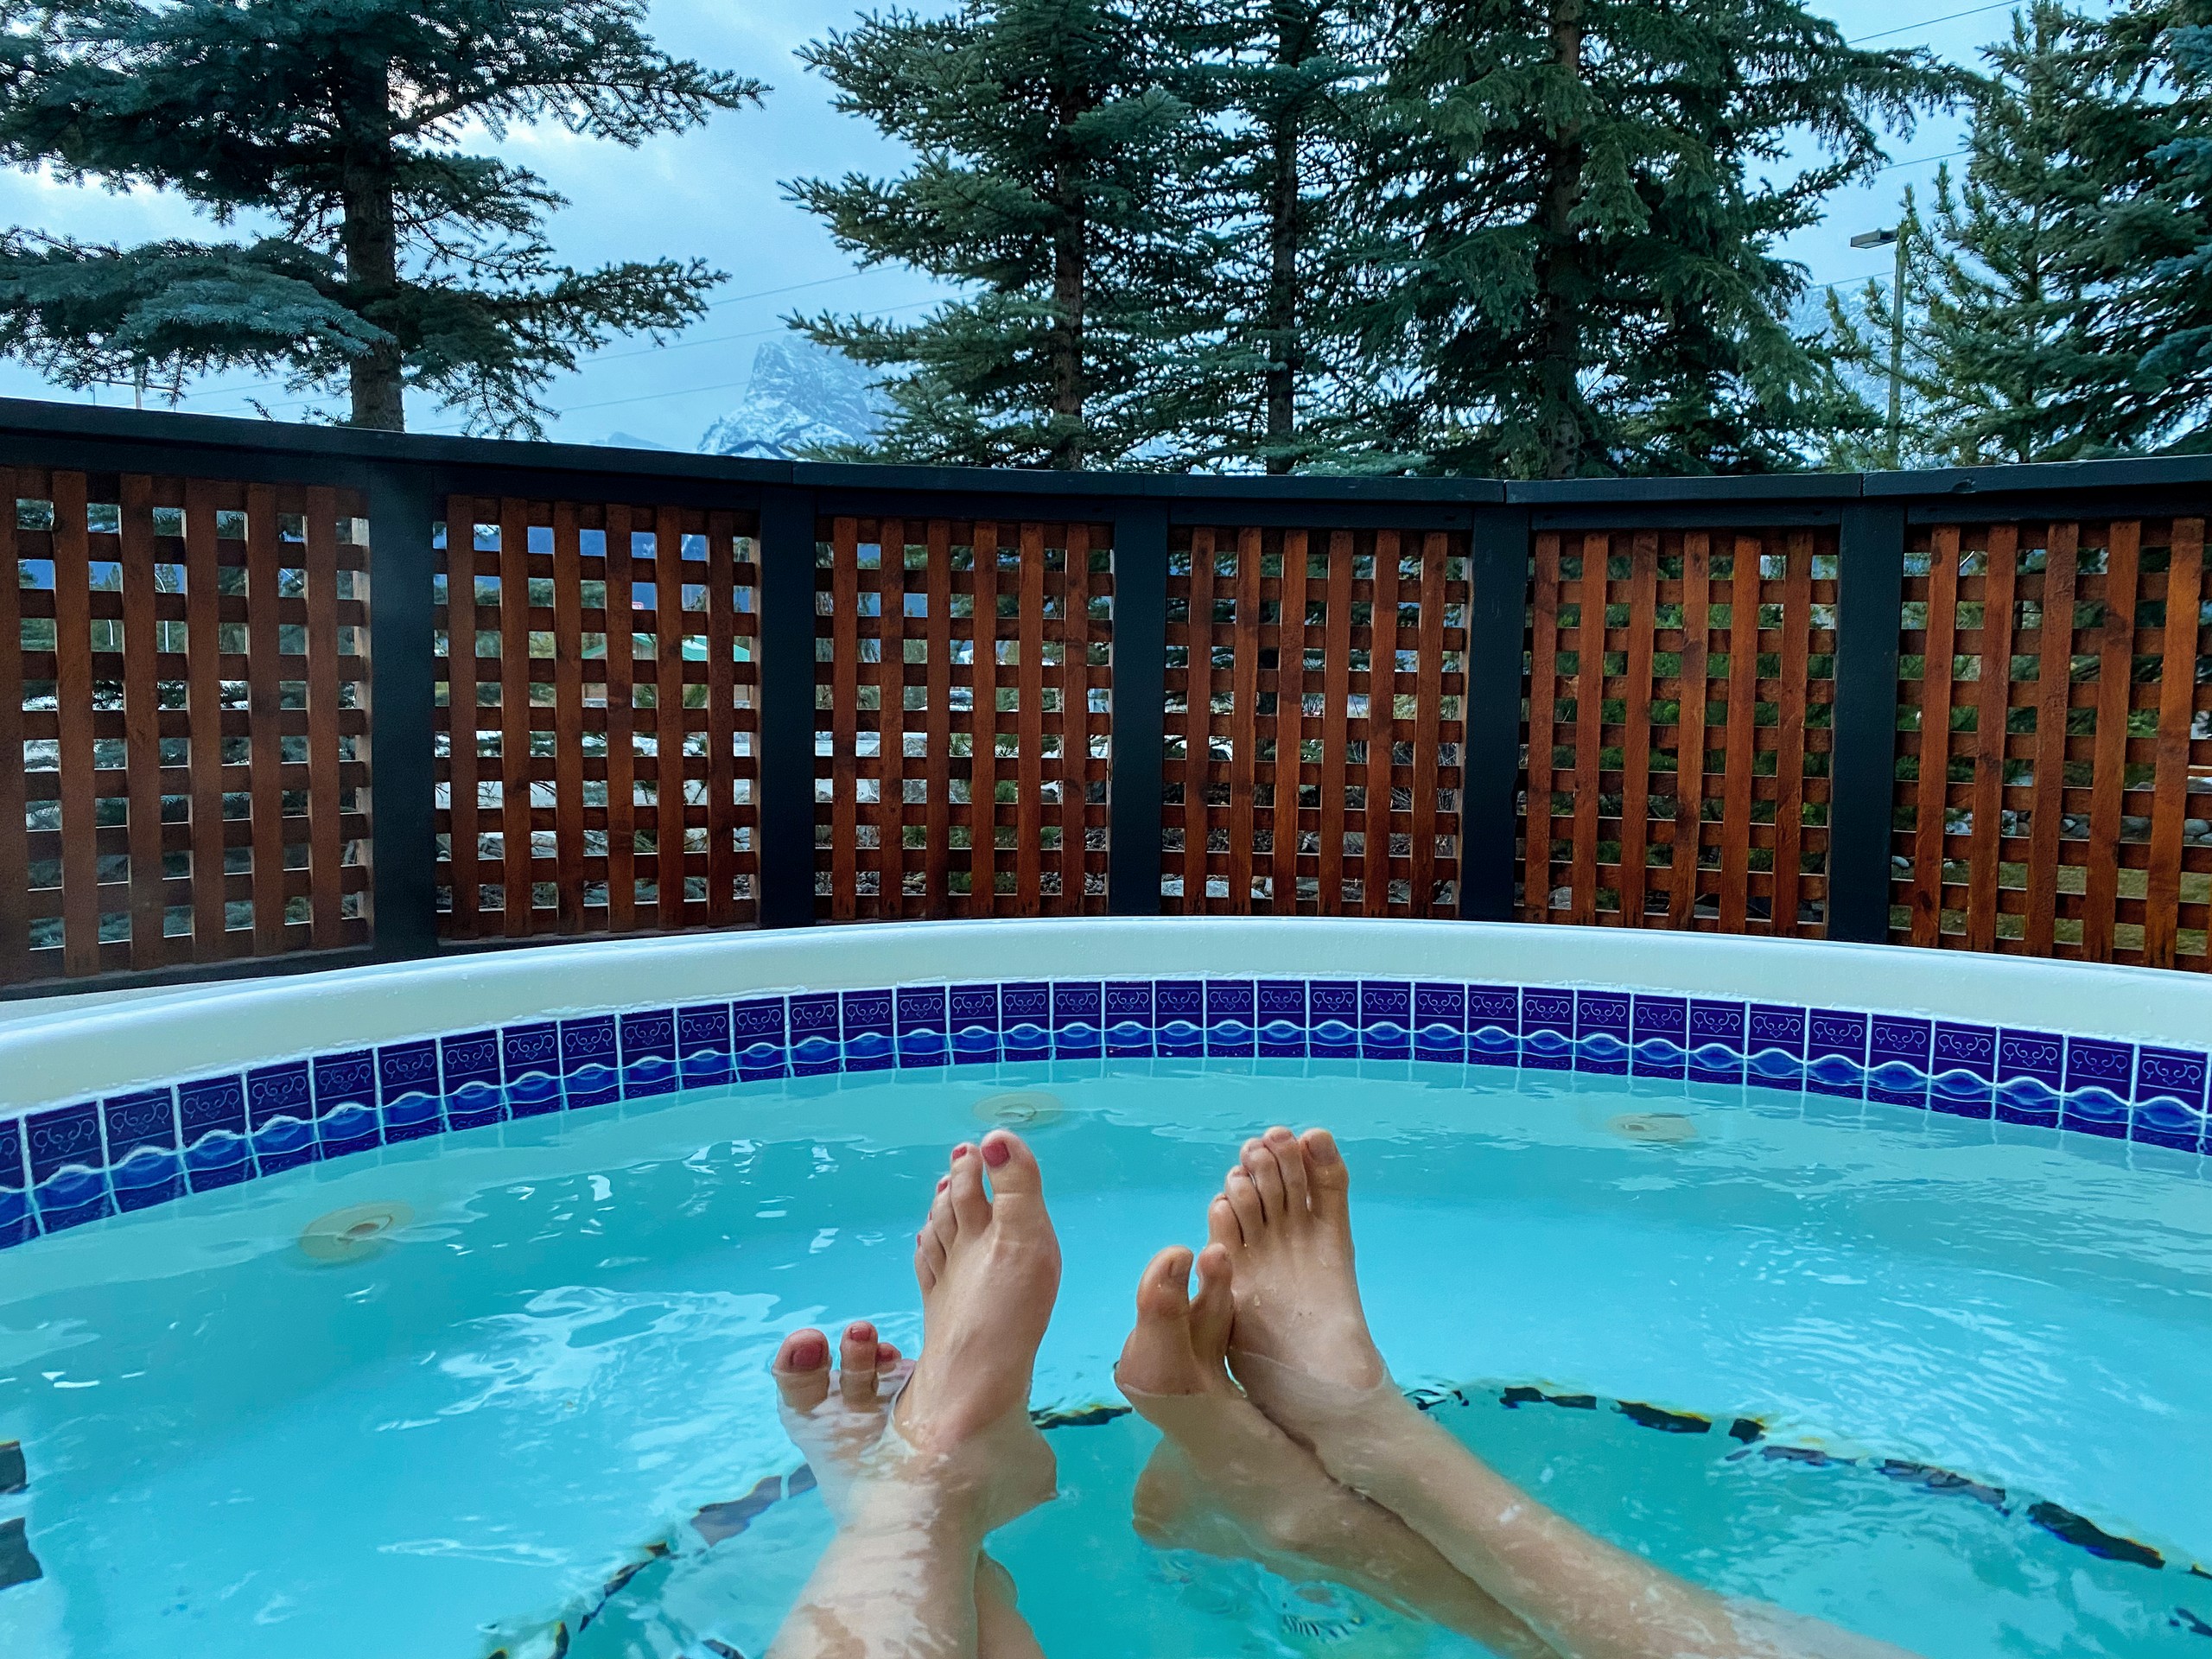 Enjoying the hottub at A Bear and Bison Inn